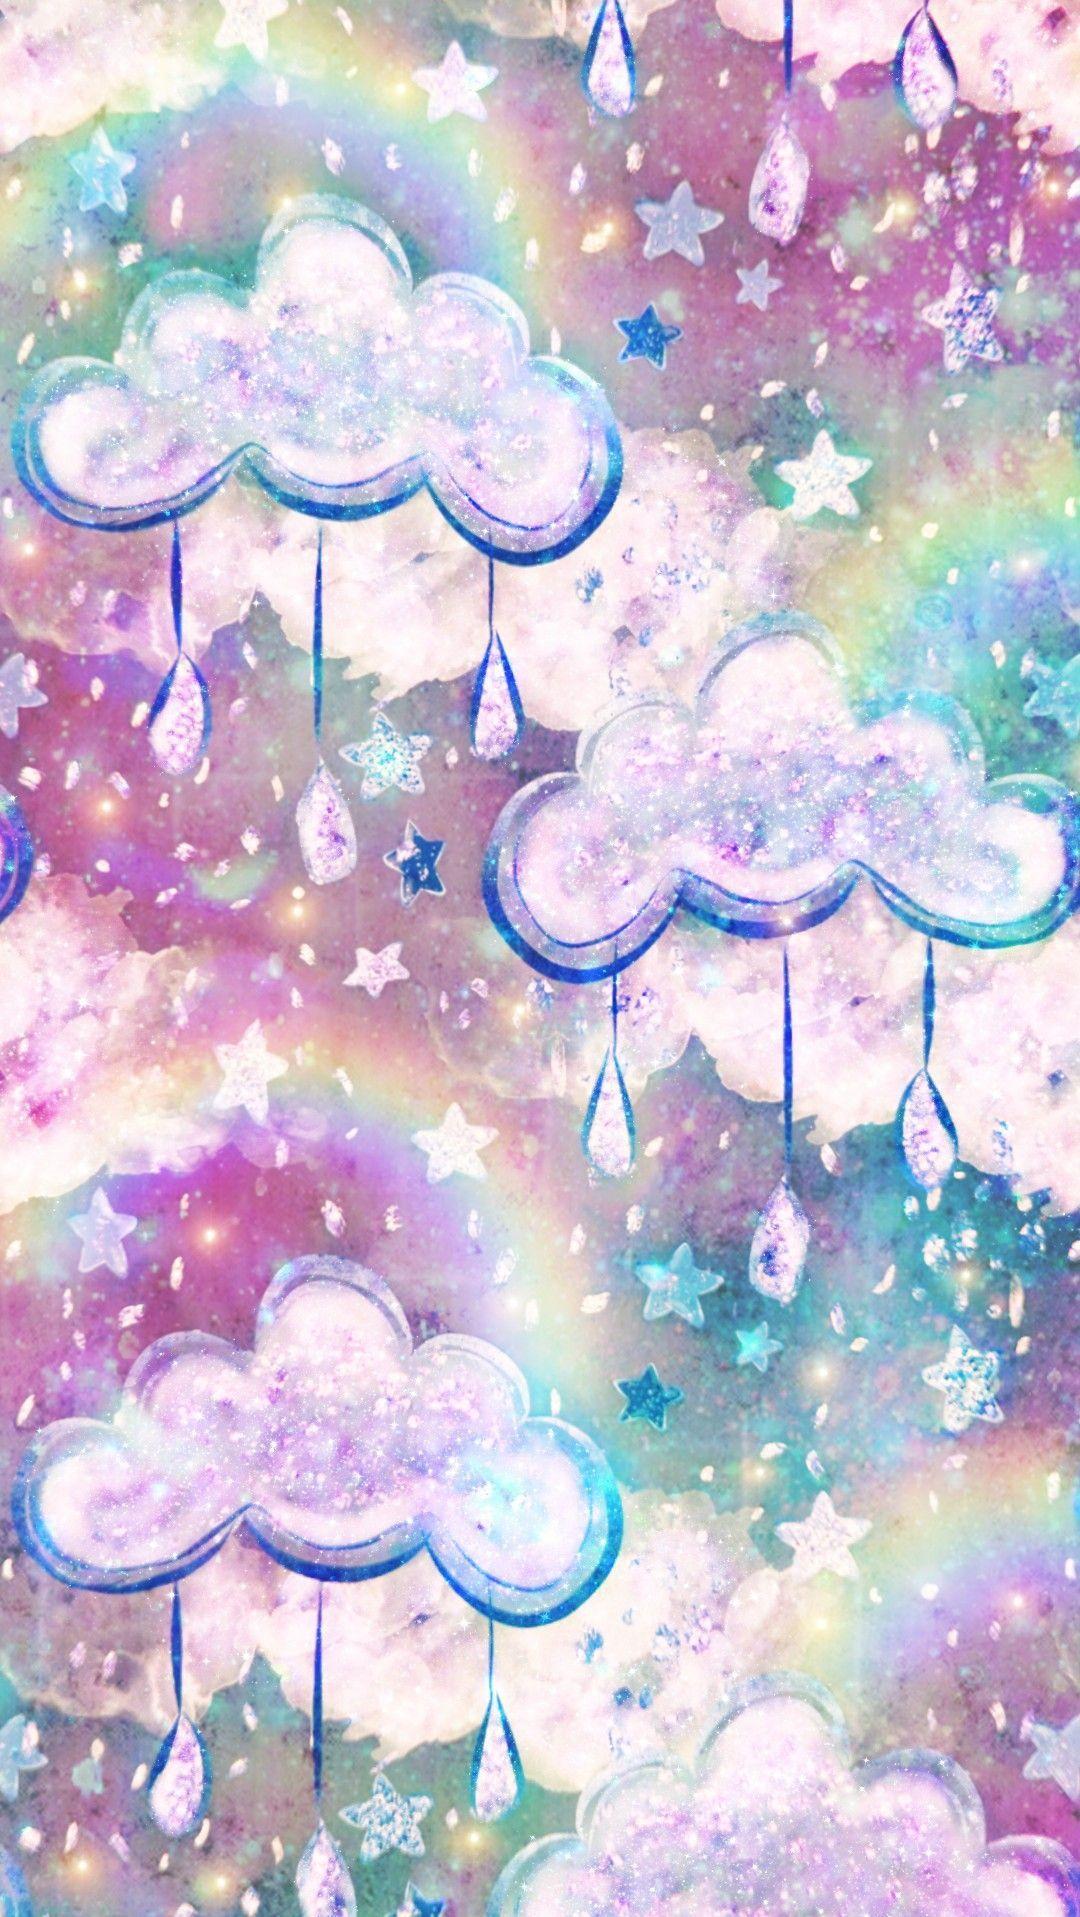 Rainbow Cloud Wallpapers - Top Free Rainbow Cloud Backgrounds ...